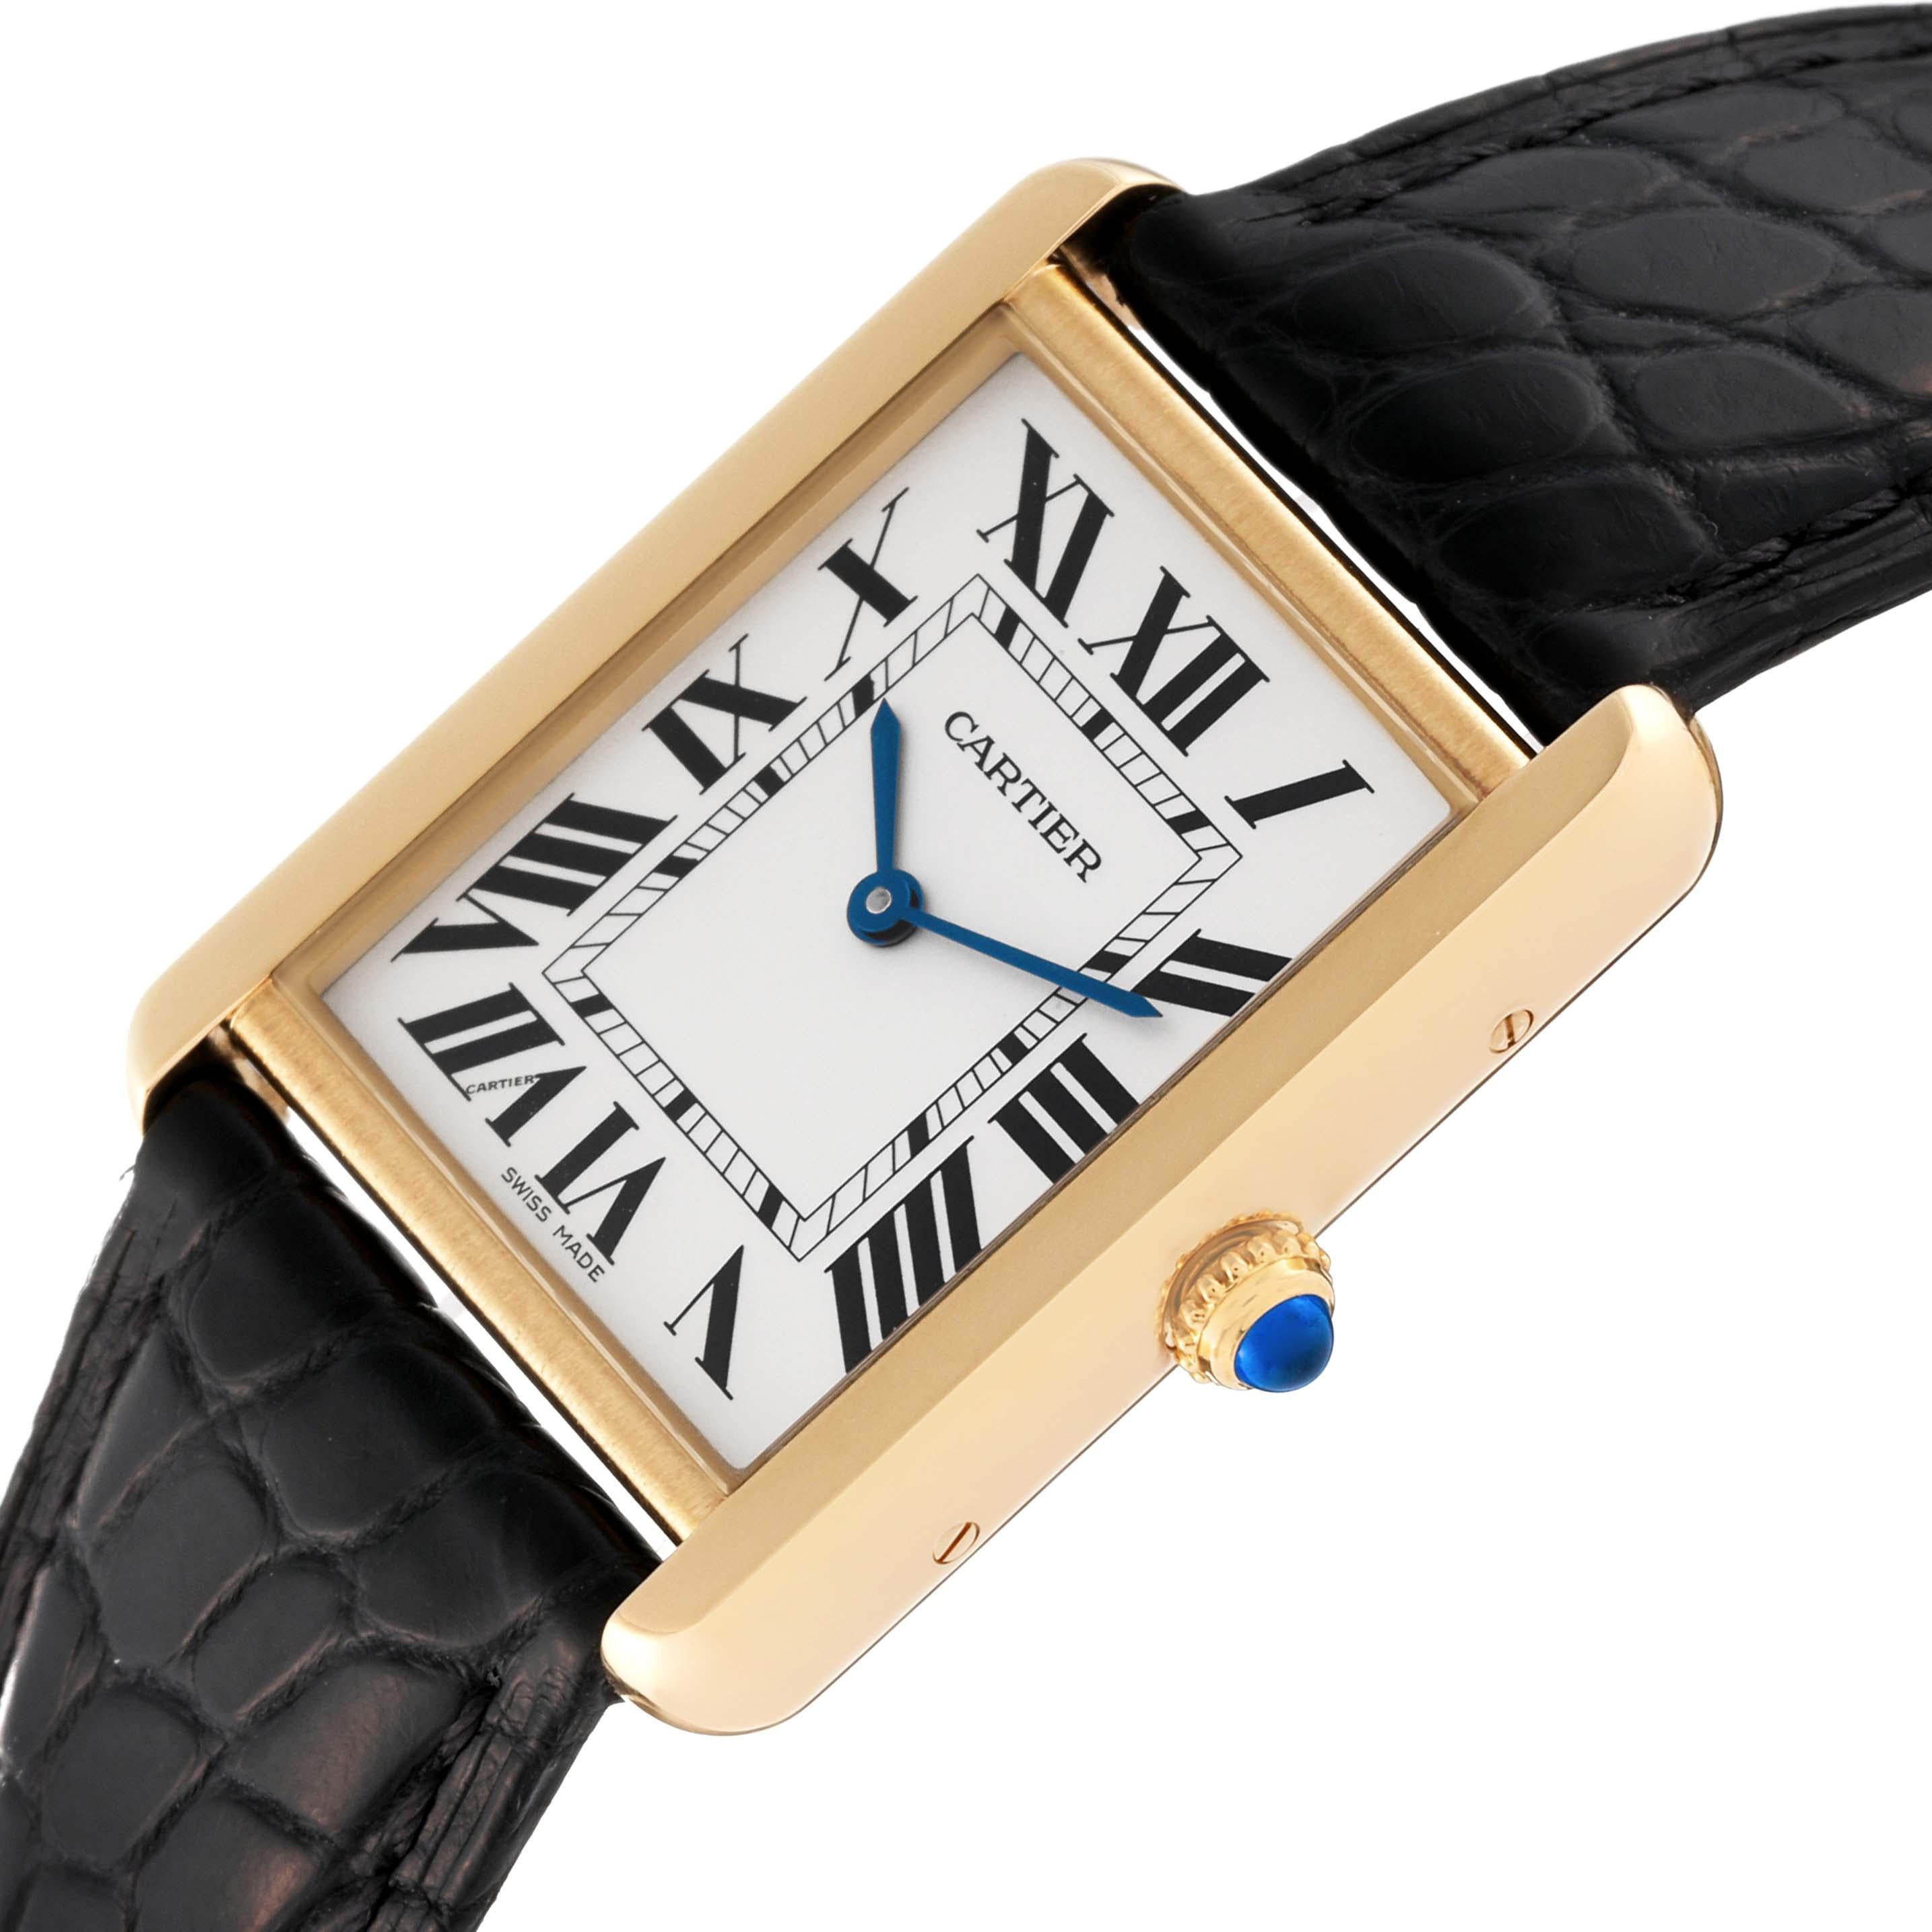 Cartier Tank Solo Large Yellow Gold Steel Mens Watch W5200004 Card. Quartz movement. 18k yellow gold case 34 mm x 27 mm. Stainless steel caseback. Circular grained crown set with a blue spinel cabochon. . Scratch resistant sapphire crystal. Silver